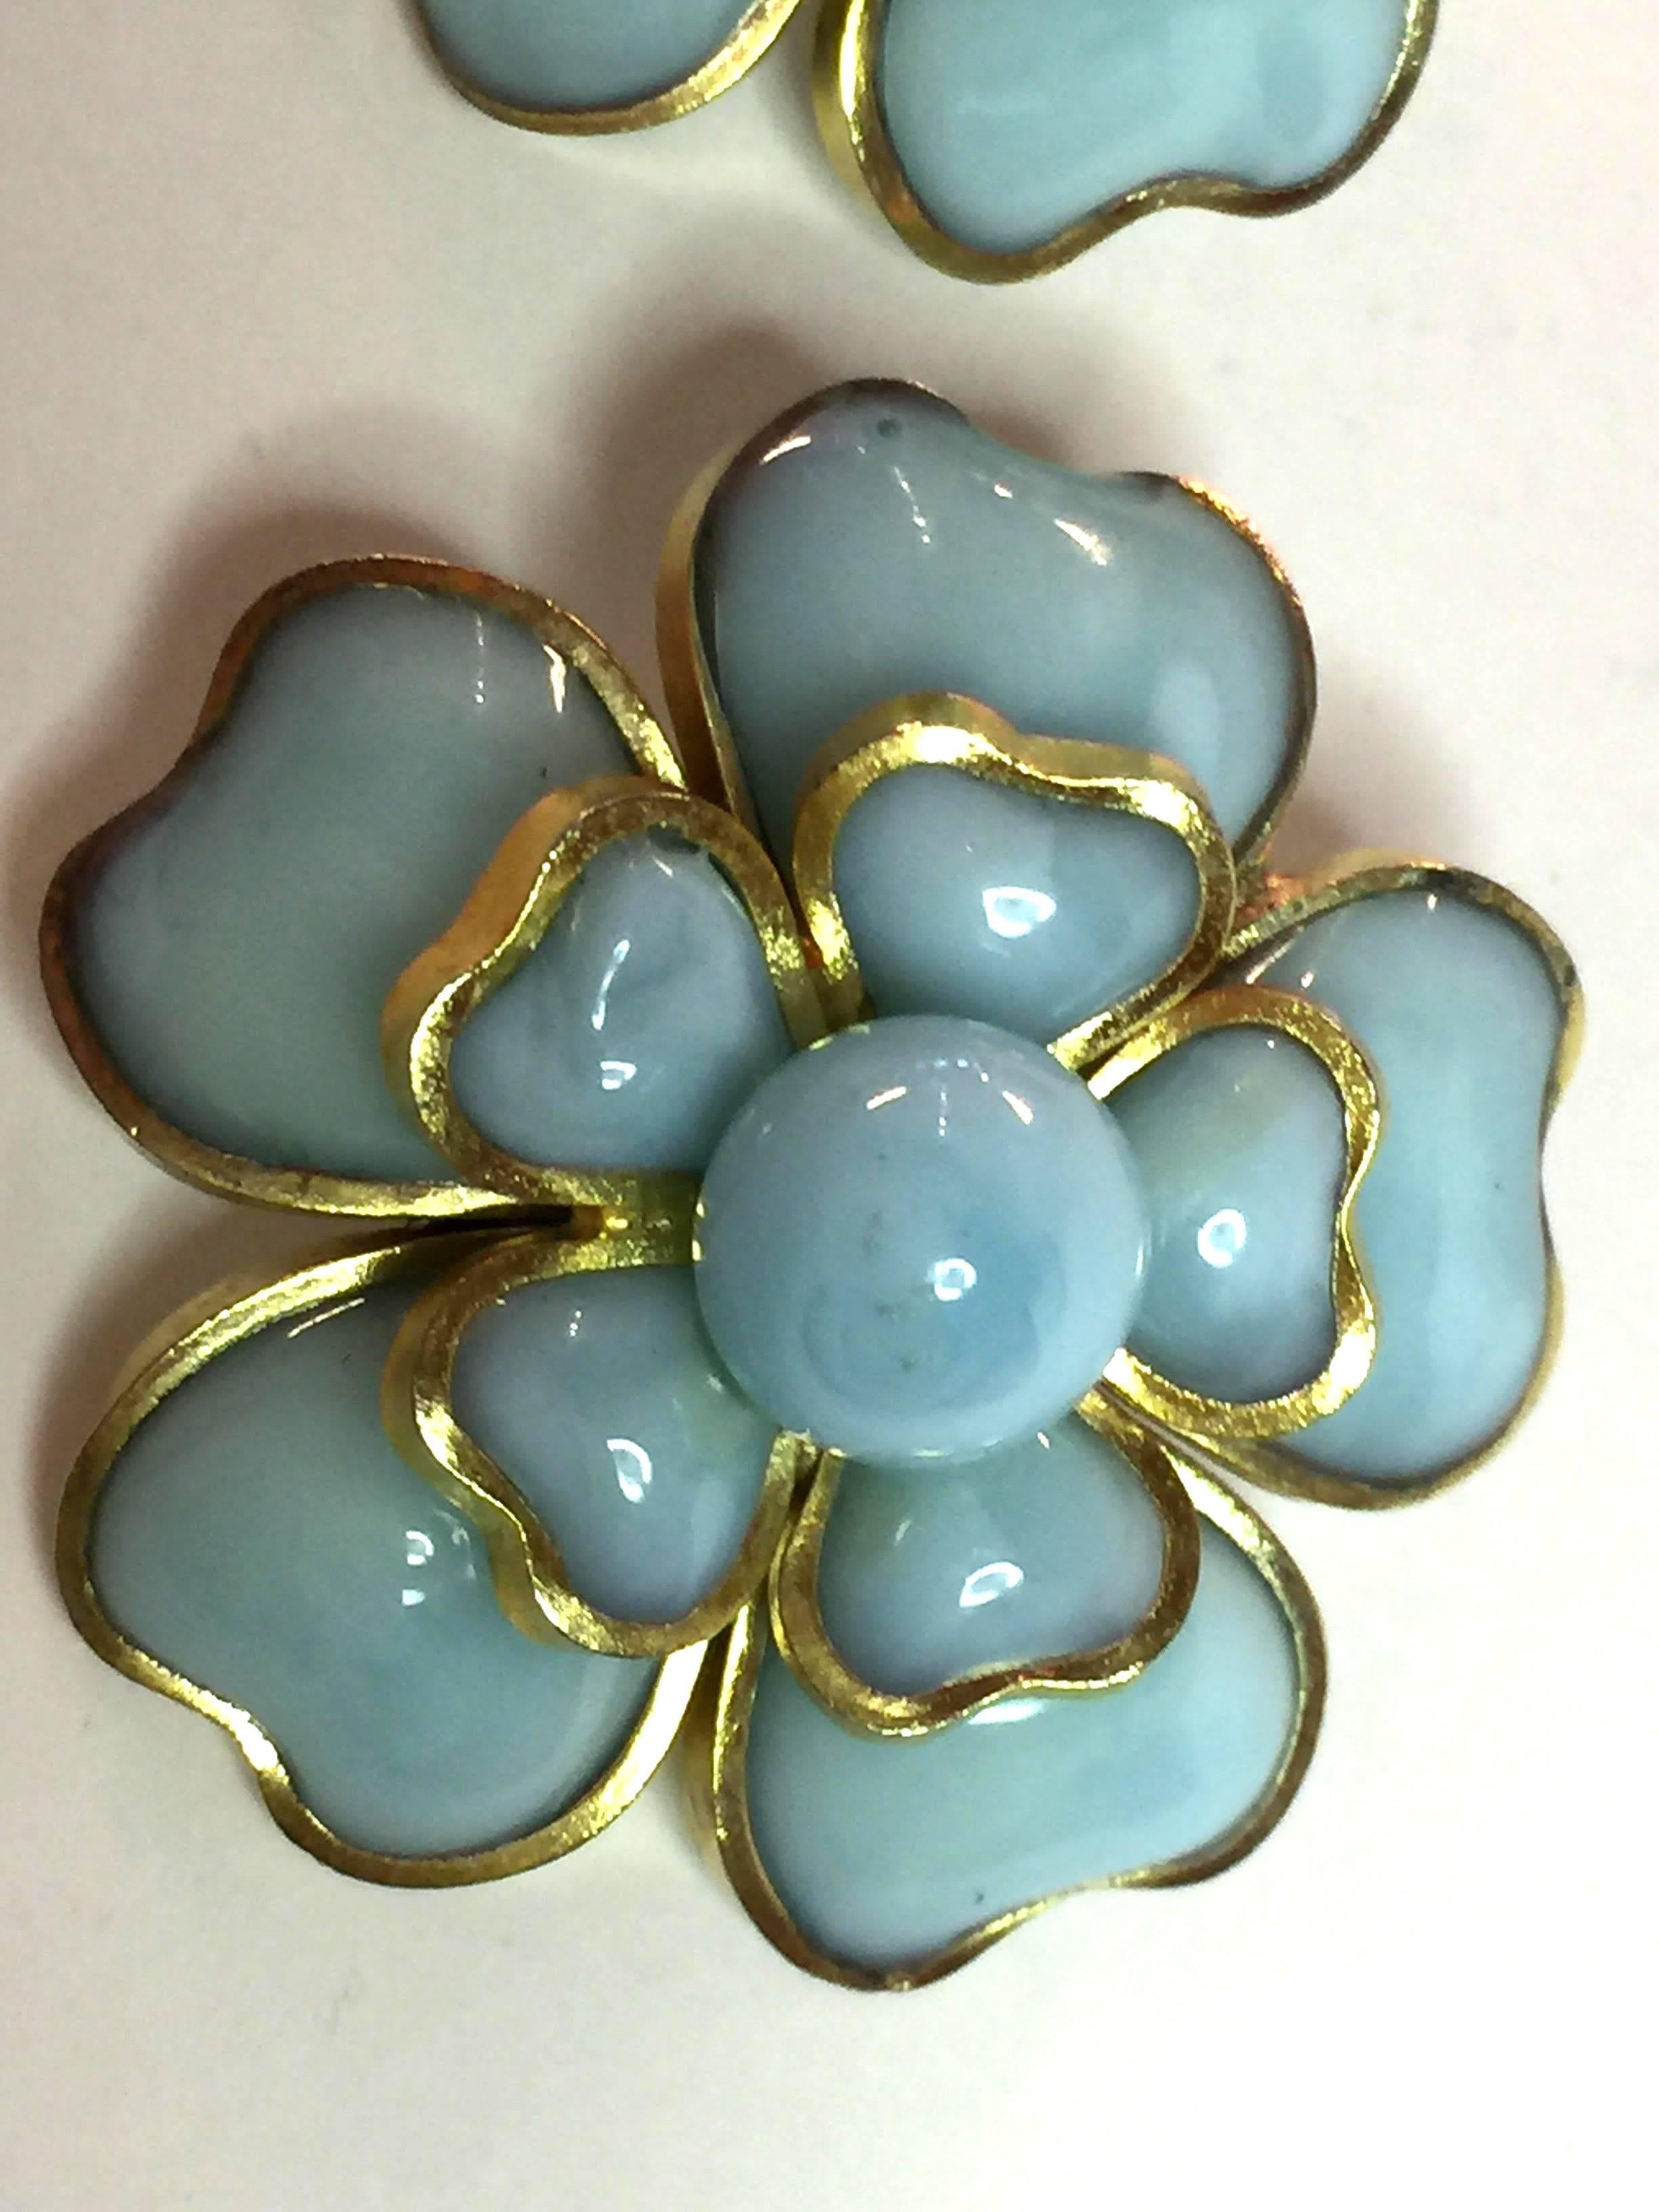 These are luscious  pale blue poured glass earrings made with storied GRIPOIX French heart shaped gilt bezel set stones of glass. Their combination creates a large and lovely flower form clip earring approximately 1.2 " in diameter with